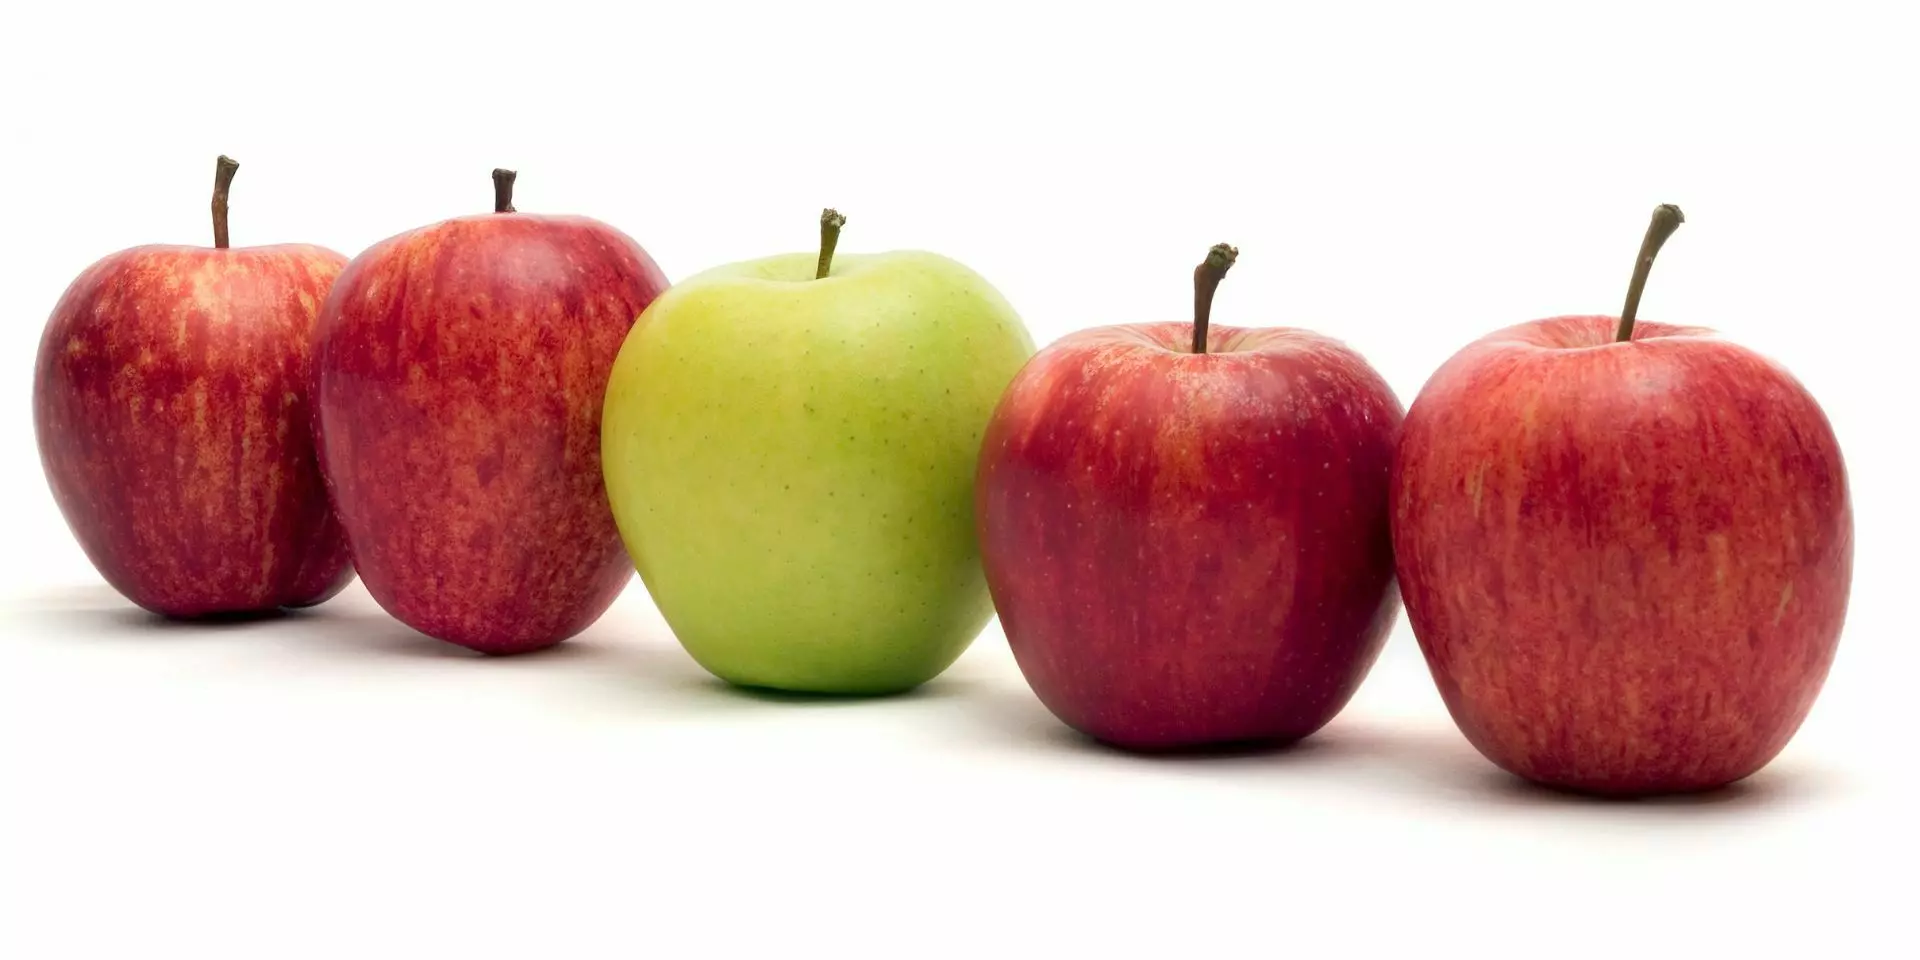 four red apples in a row with a green apple in the middle